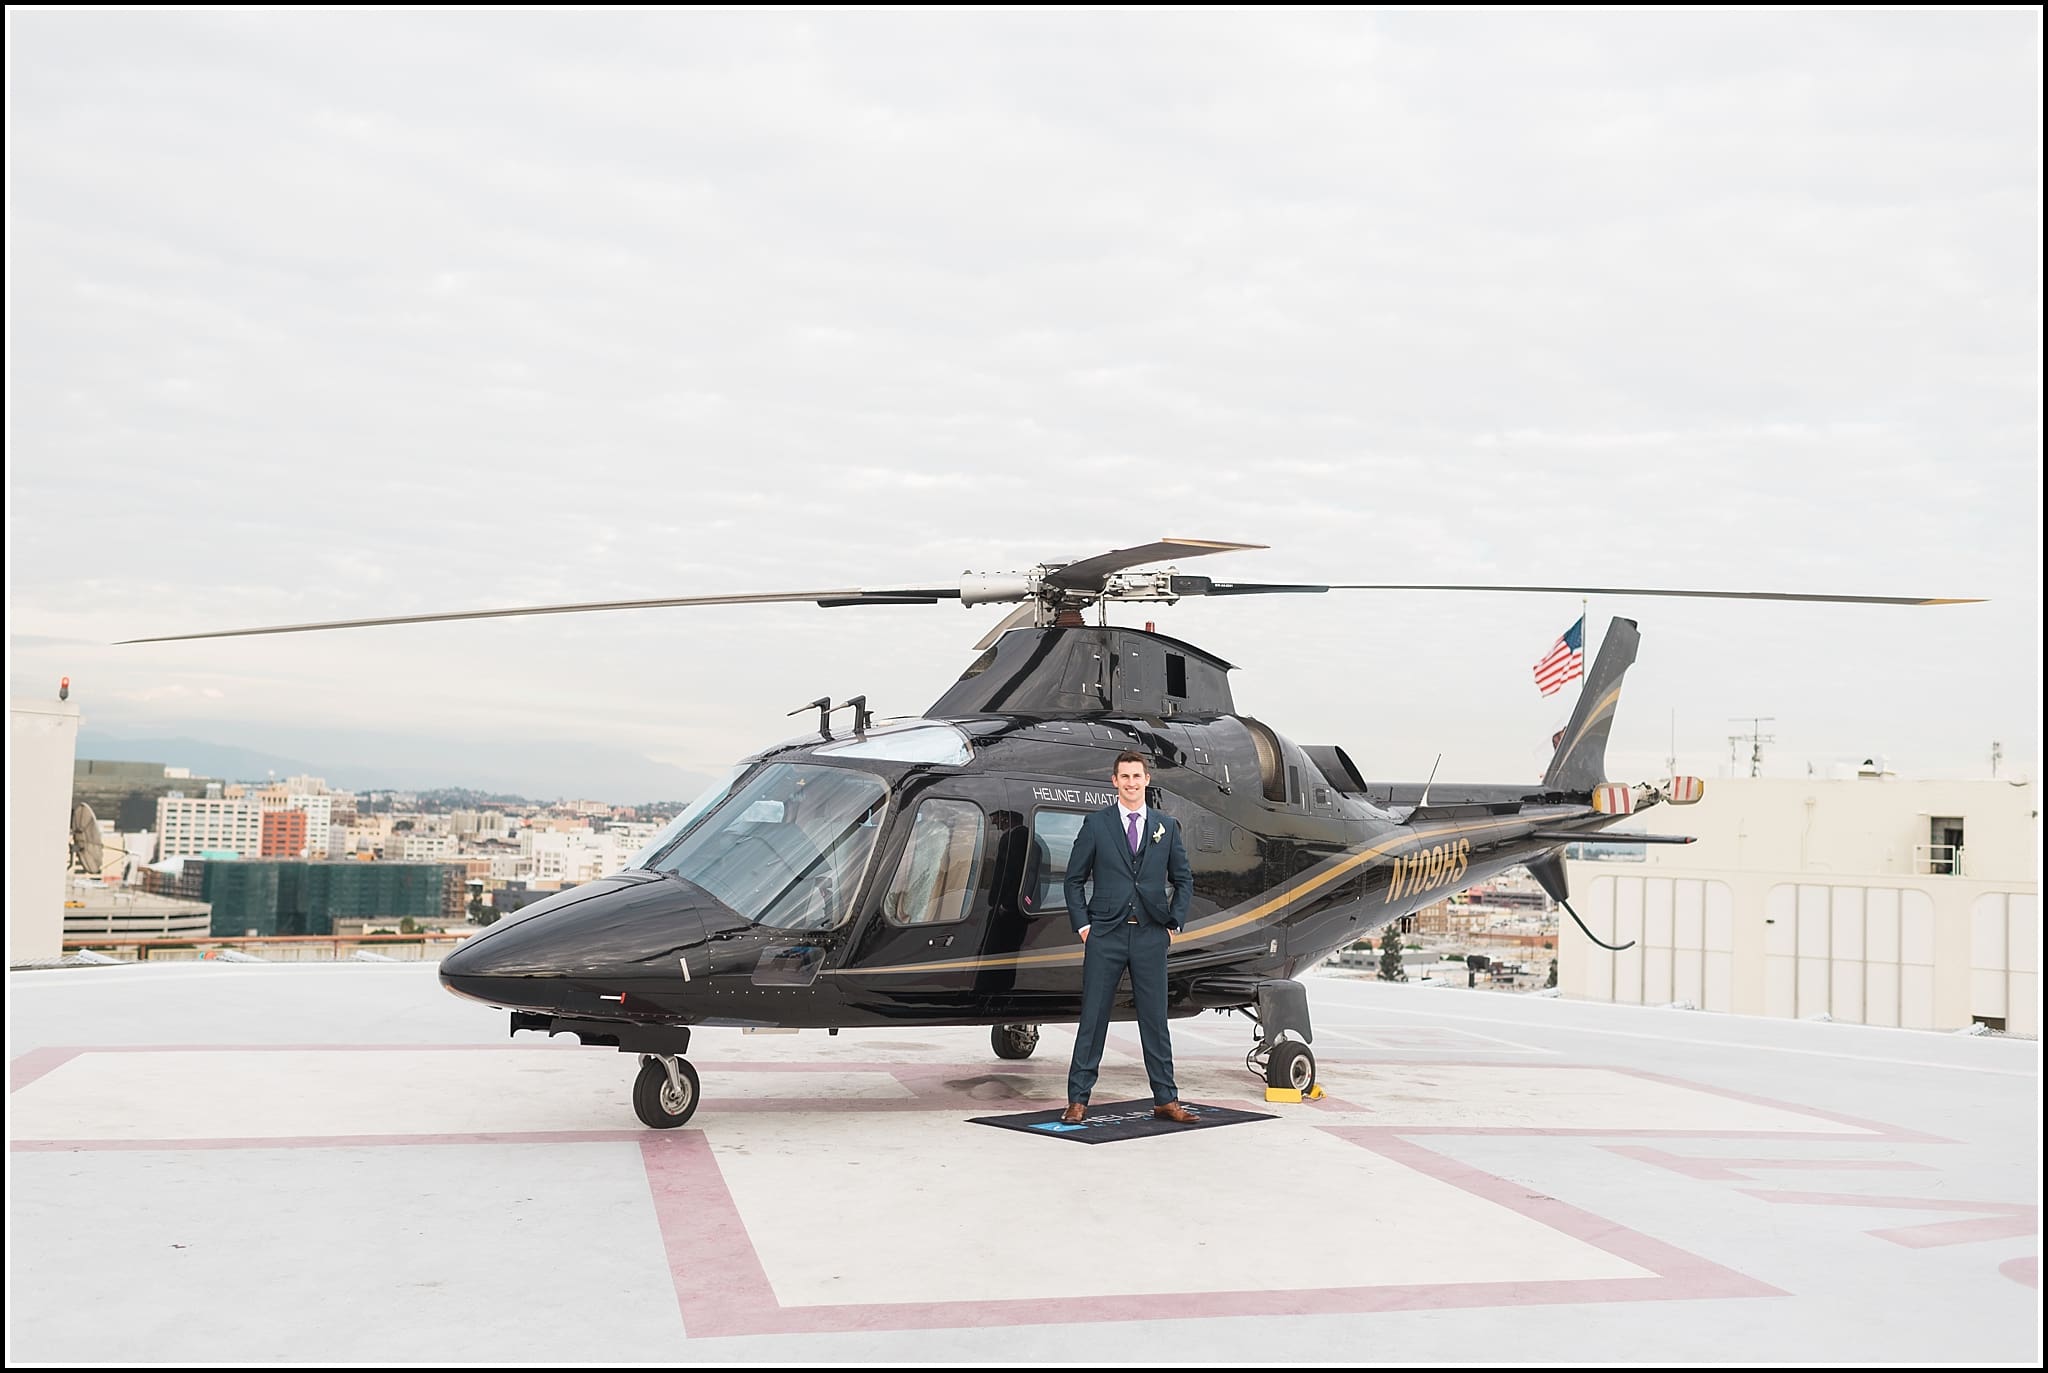  favorite wedding images 2016, wedding photos from 2016, our favorite wedding photos, arriving by helicopter, groom with helicopter, downtown LA wedding